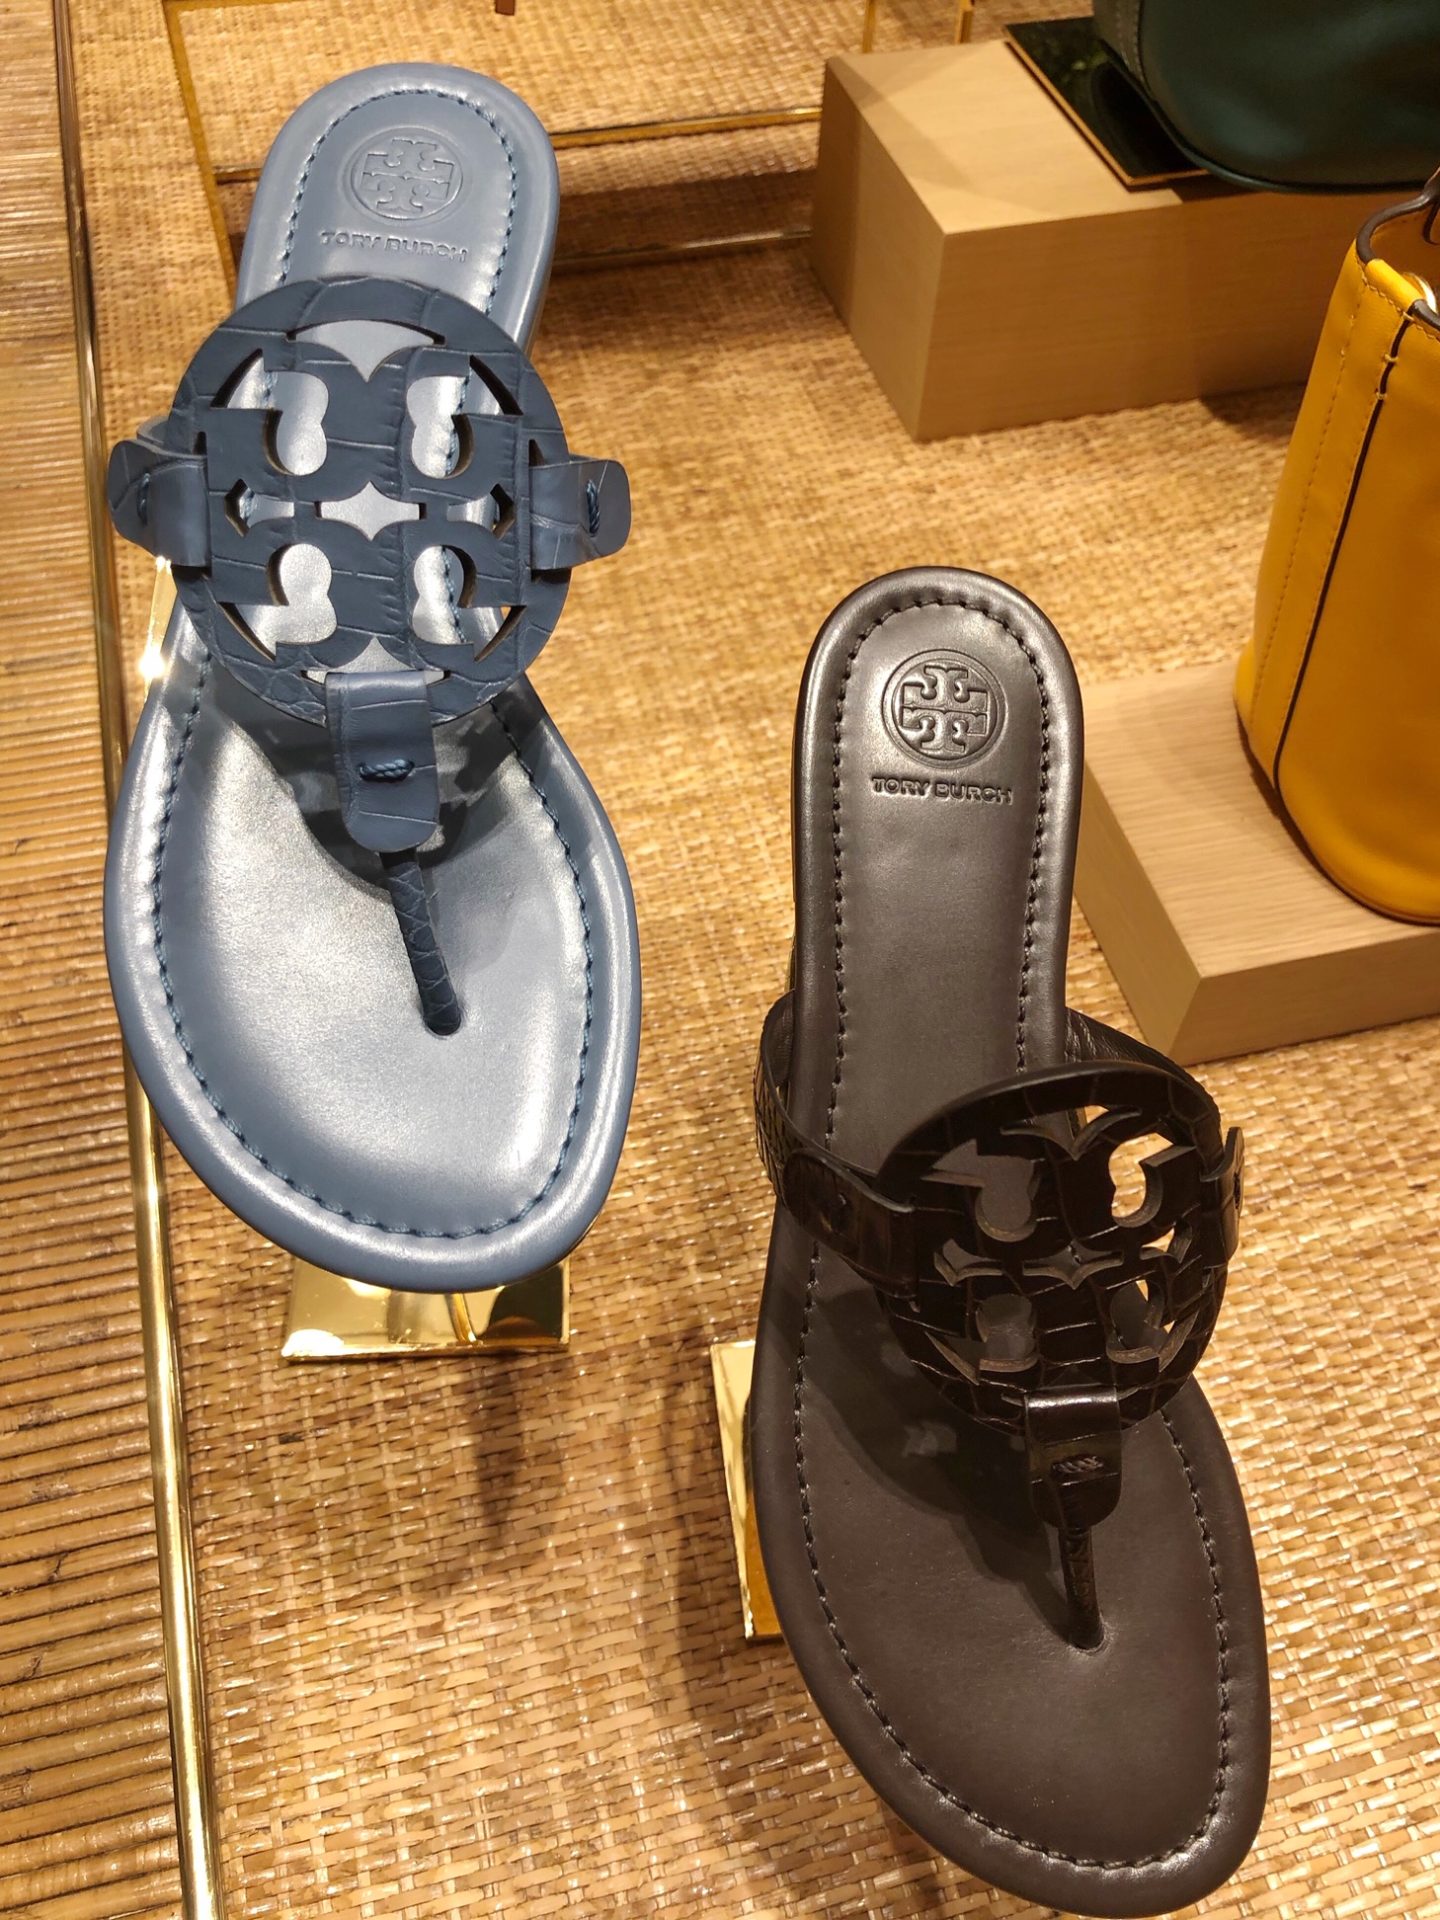 Tory Burch Fall Event 2019 | Save Up To 30% Off + FREE Shipping! - The ...